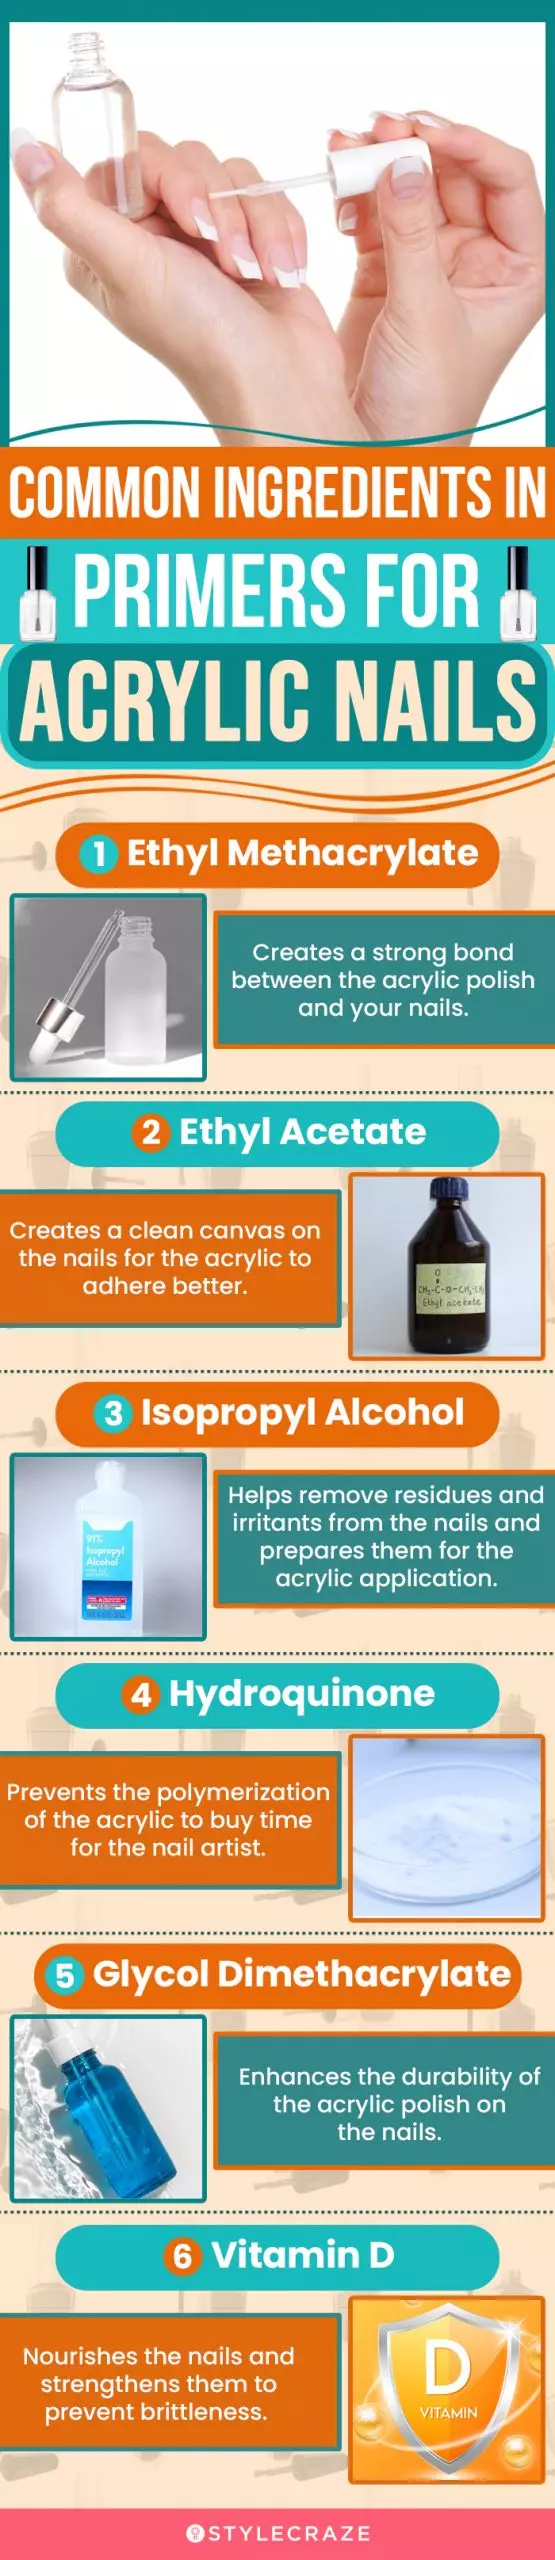 Common Ingredients In Primers For Acrylic Nails (infographic)